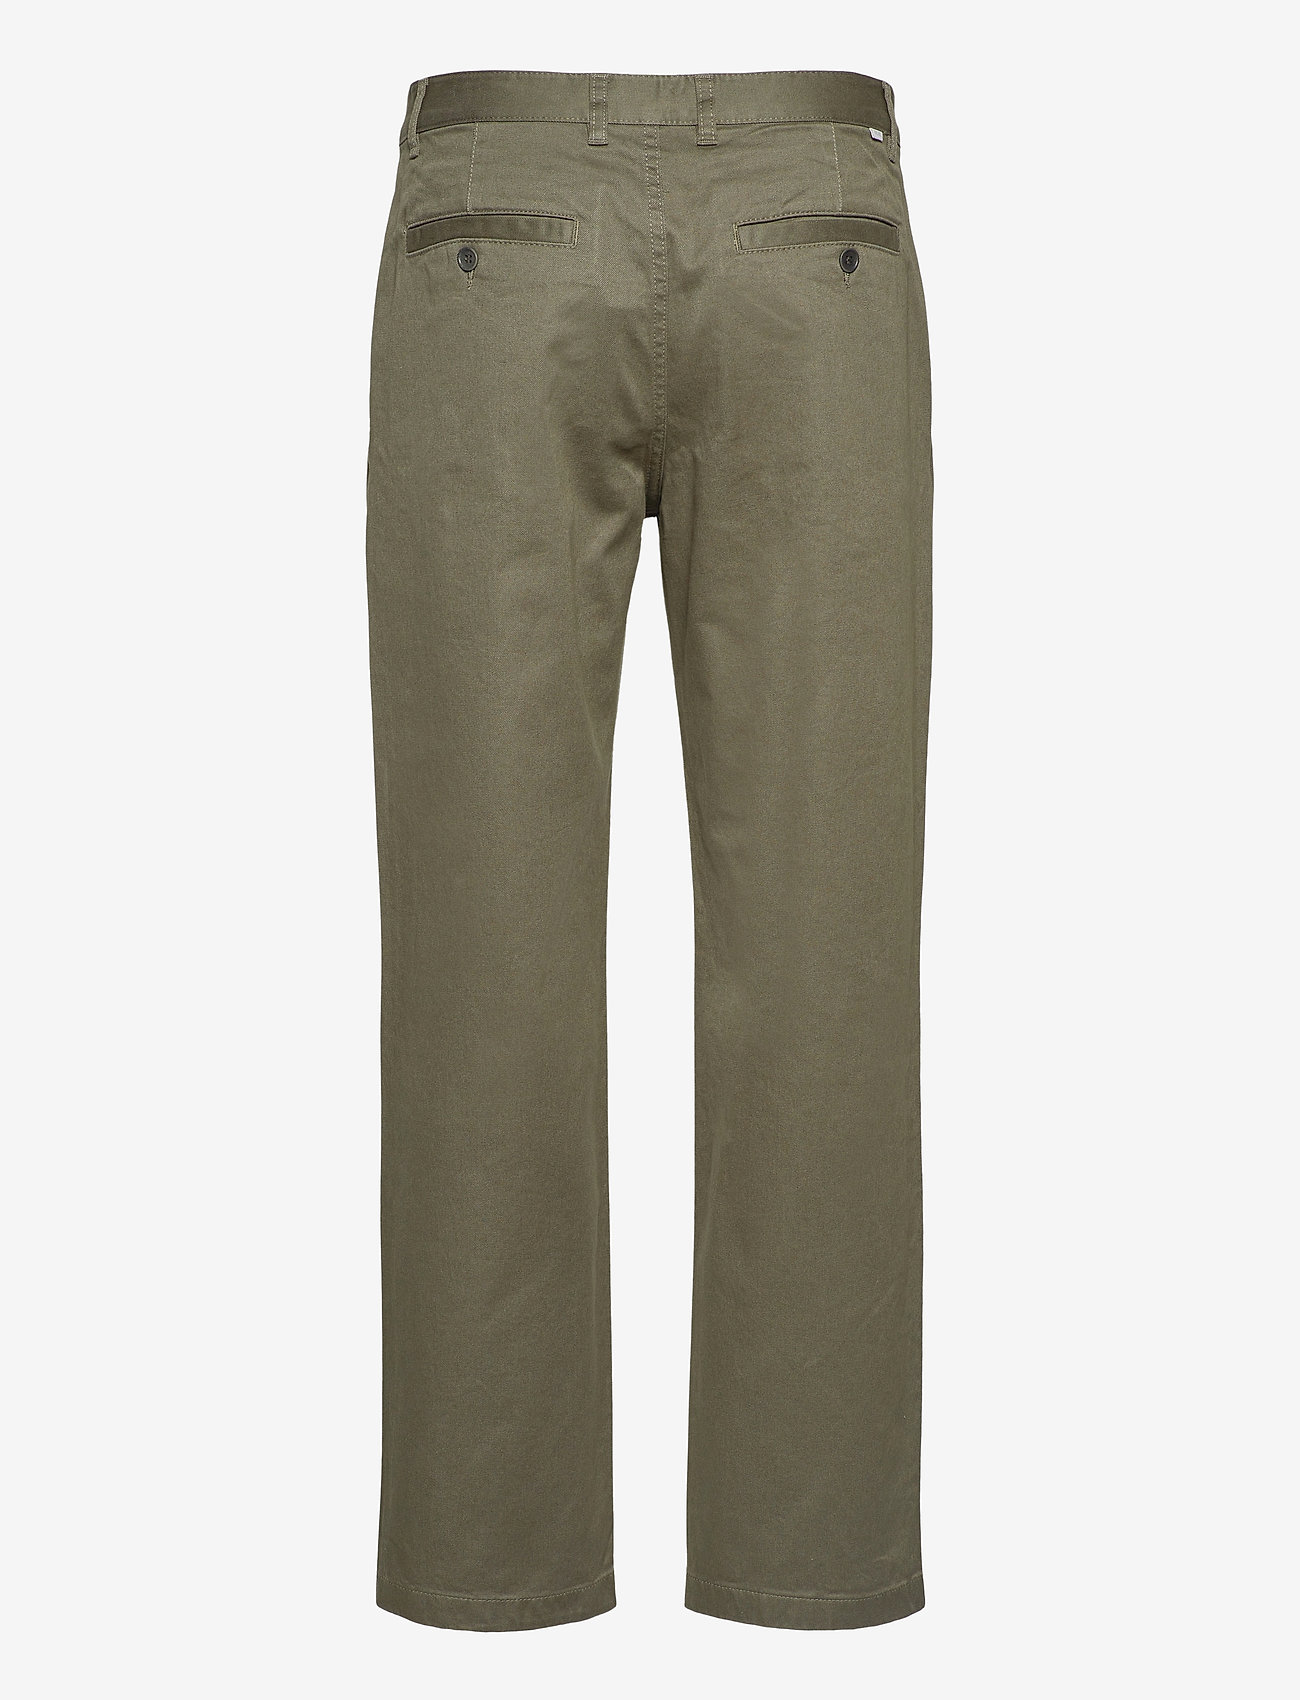 Wood Wood - Stefan classic trousers - chinos - olive - 1